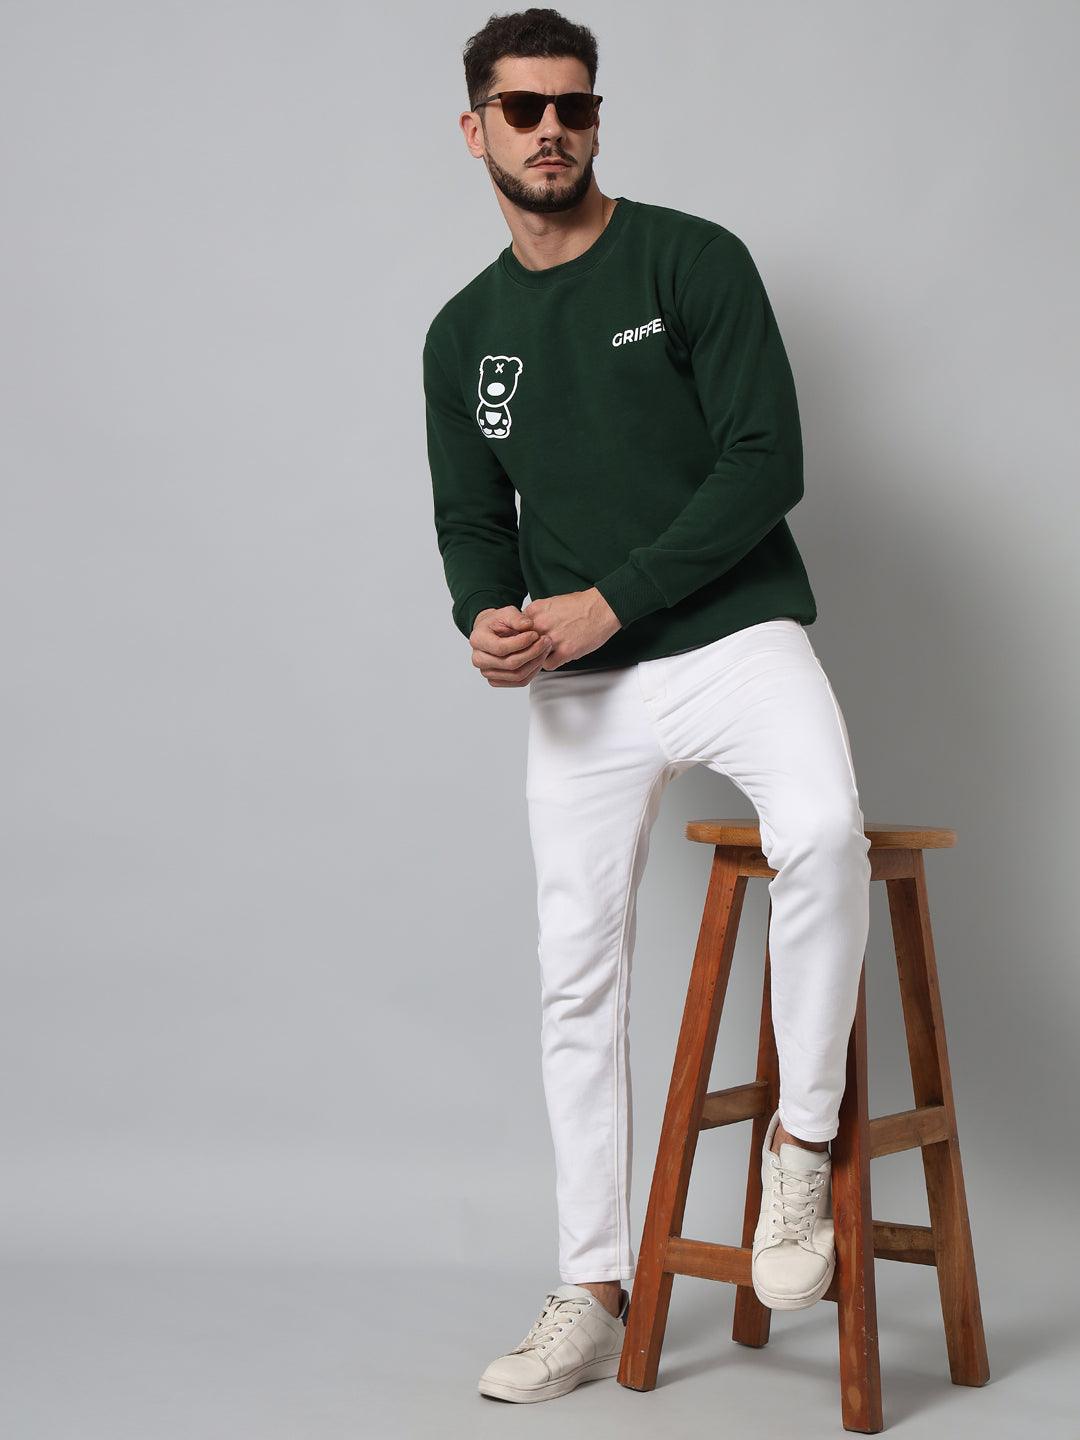 Griffel Men's Cotton Fleece Round Neck Printed Green Sweatshirt with Full Sleeve and Front Logo Print - griffel